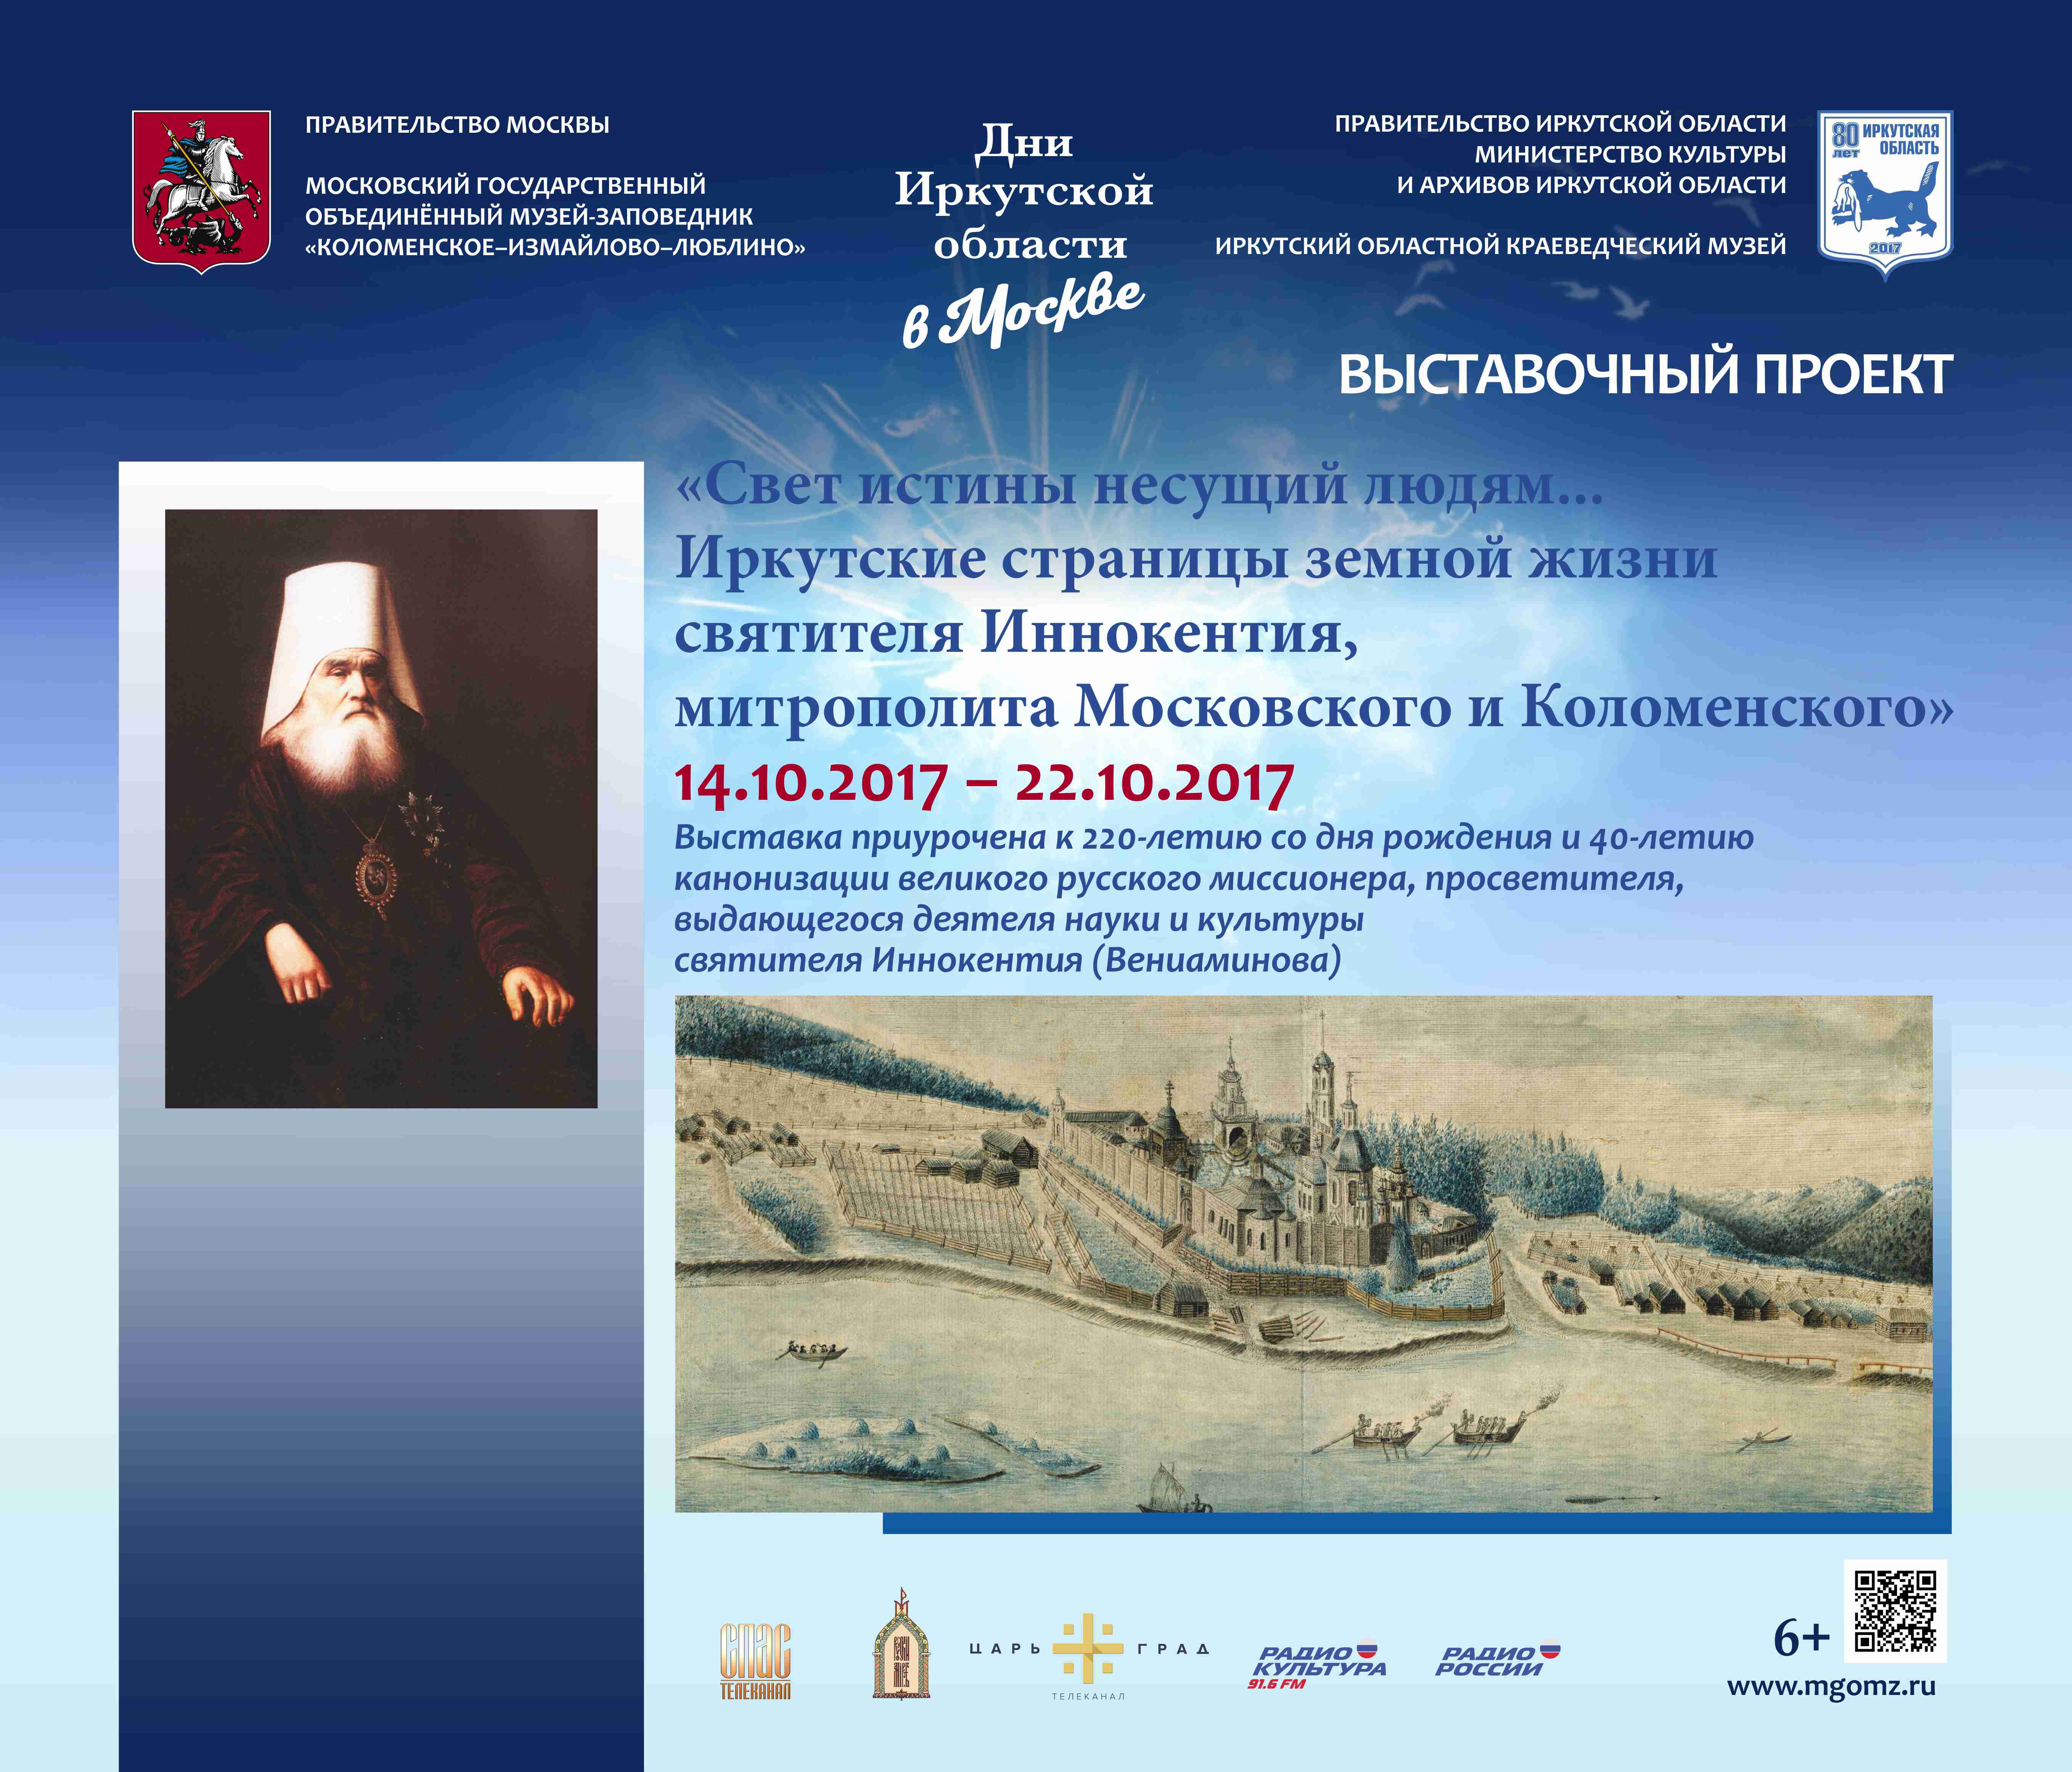 The exhibition “The light of truth that bears people … Irkutsk pages of the earthly life of St. Innocent, Metropolitan of Moscow and Kolomna”